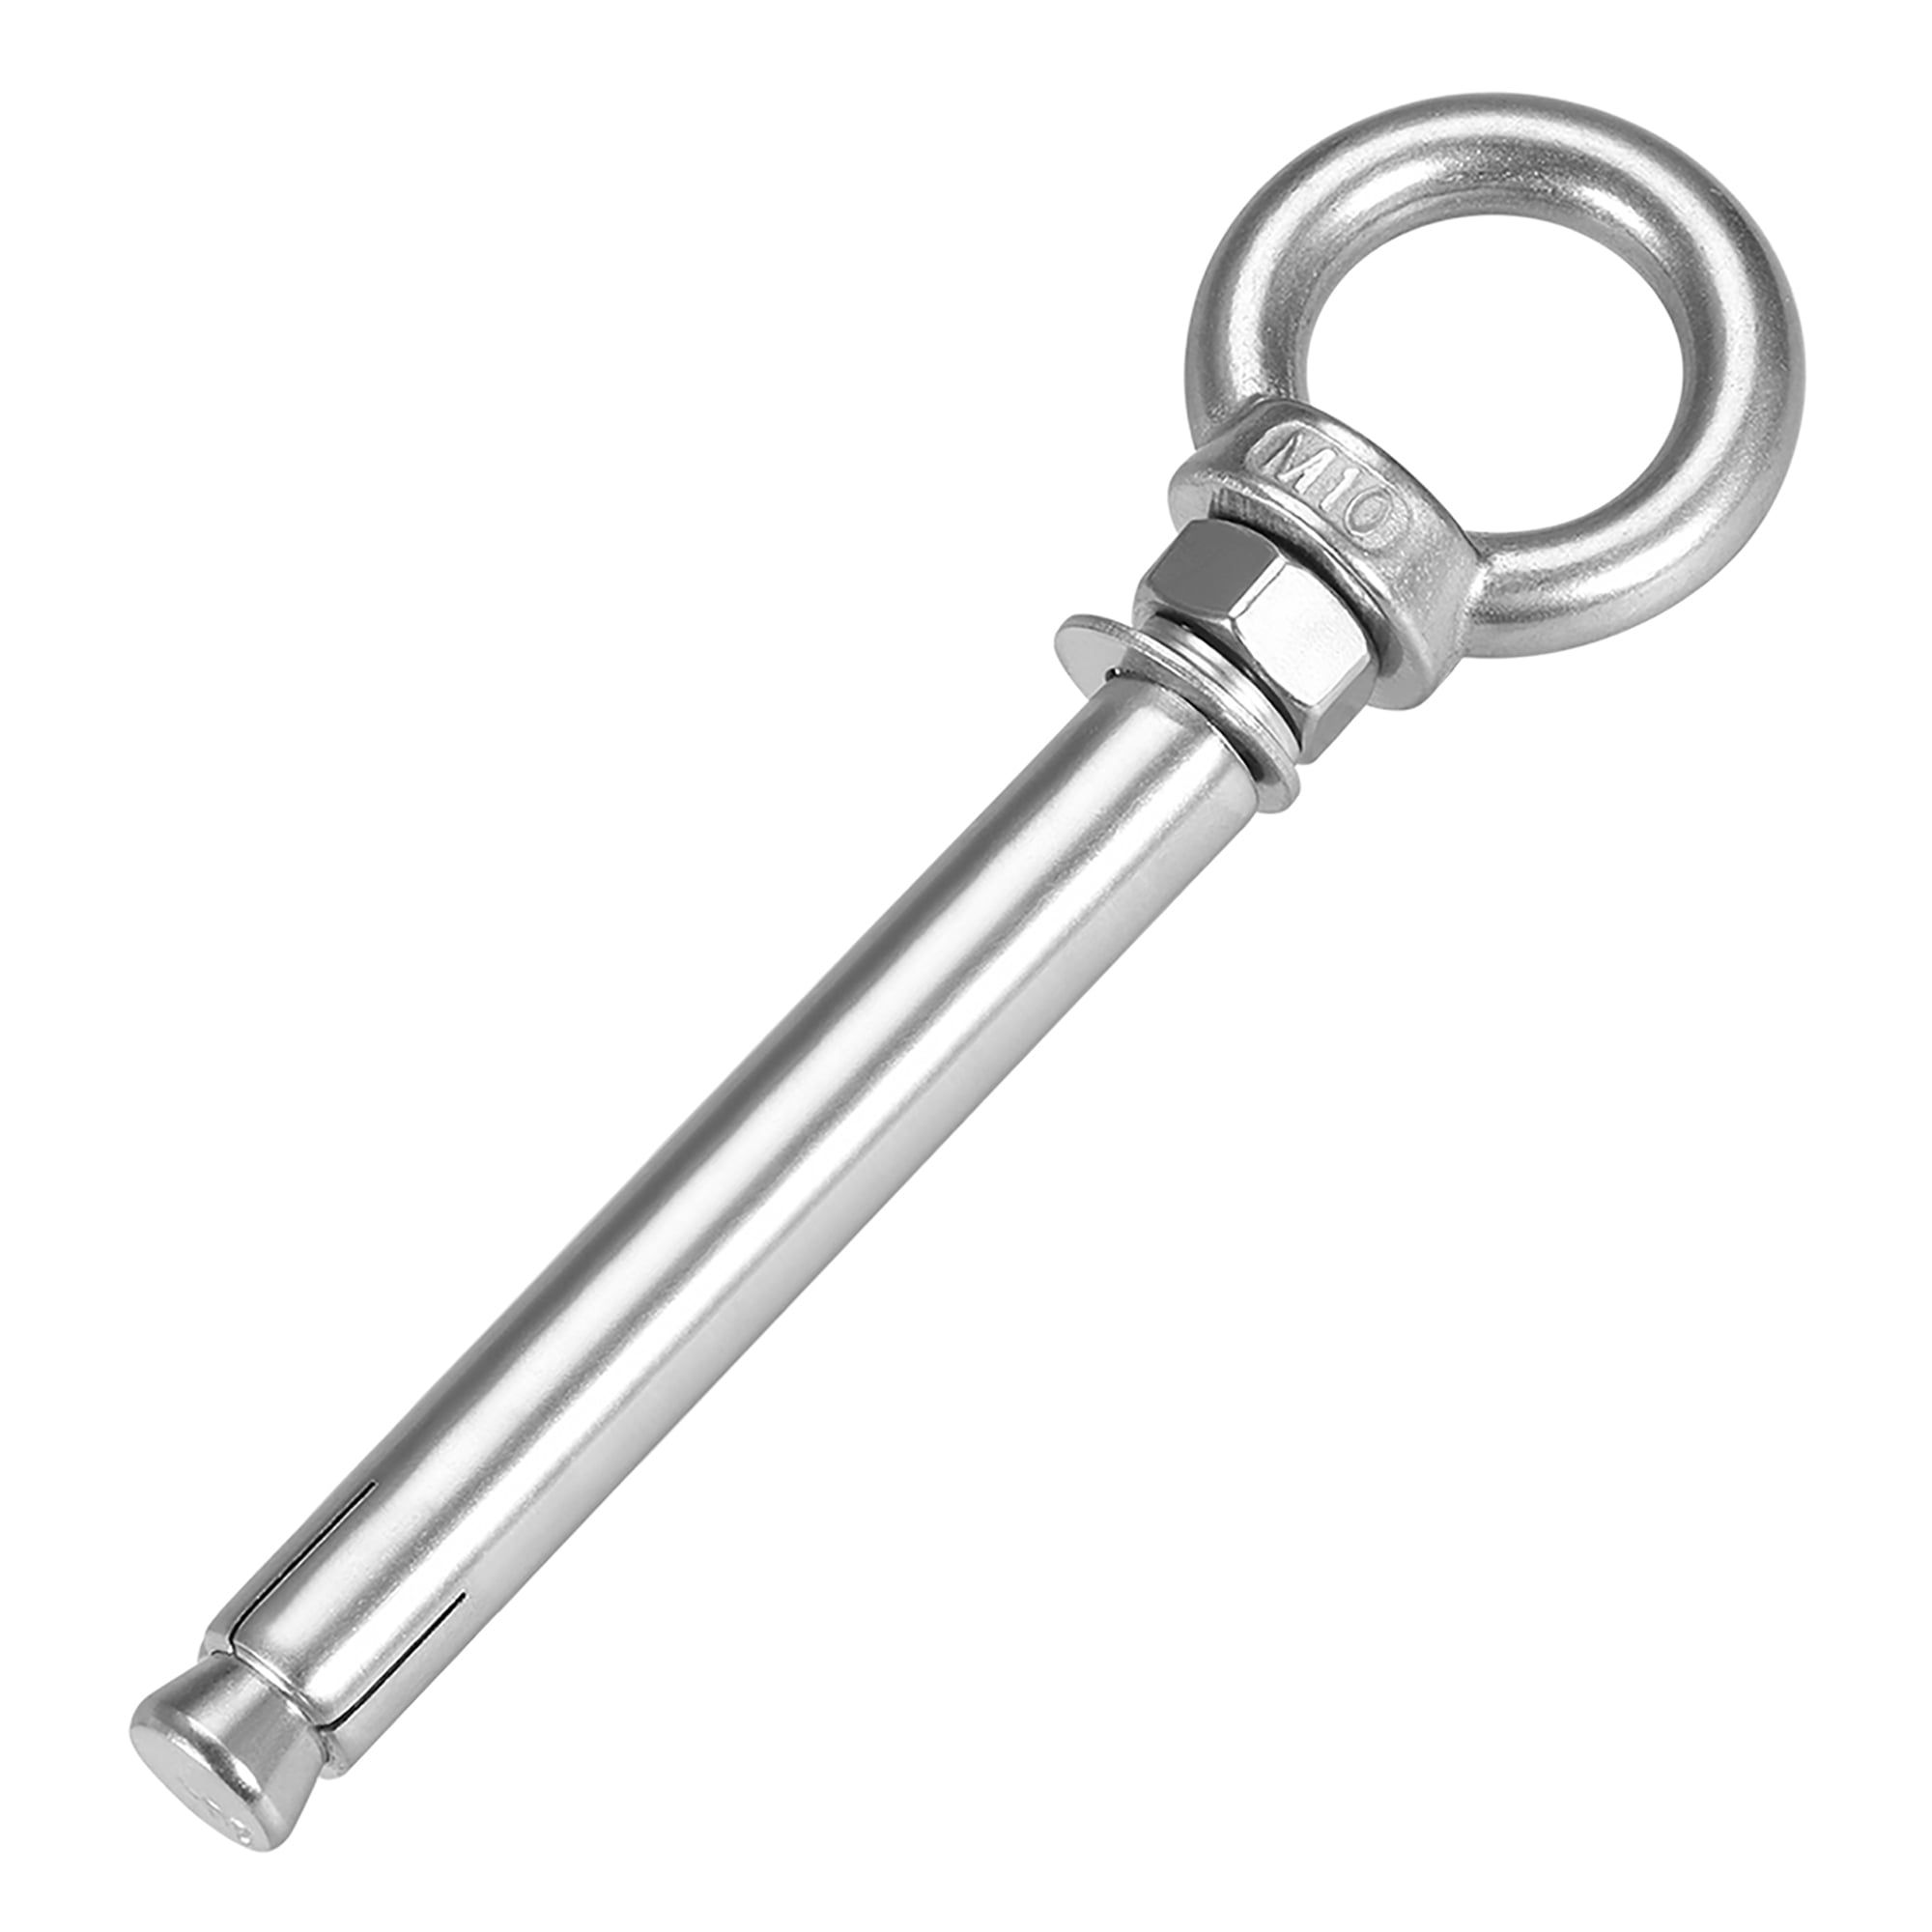 Uxcell M10x120 304 Stainless Steel Expansion Eyebolt Screw Eye Nuts with  Ring Anchor Raw Bolts (pack of 1)